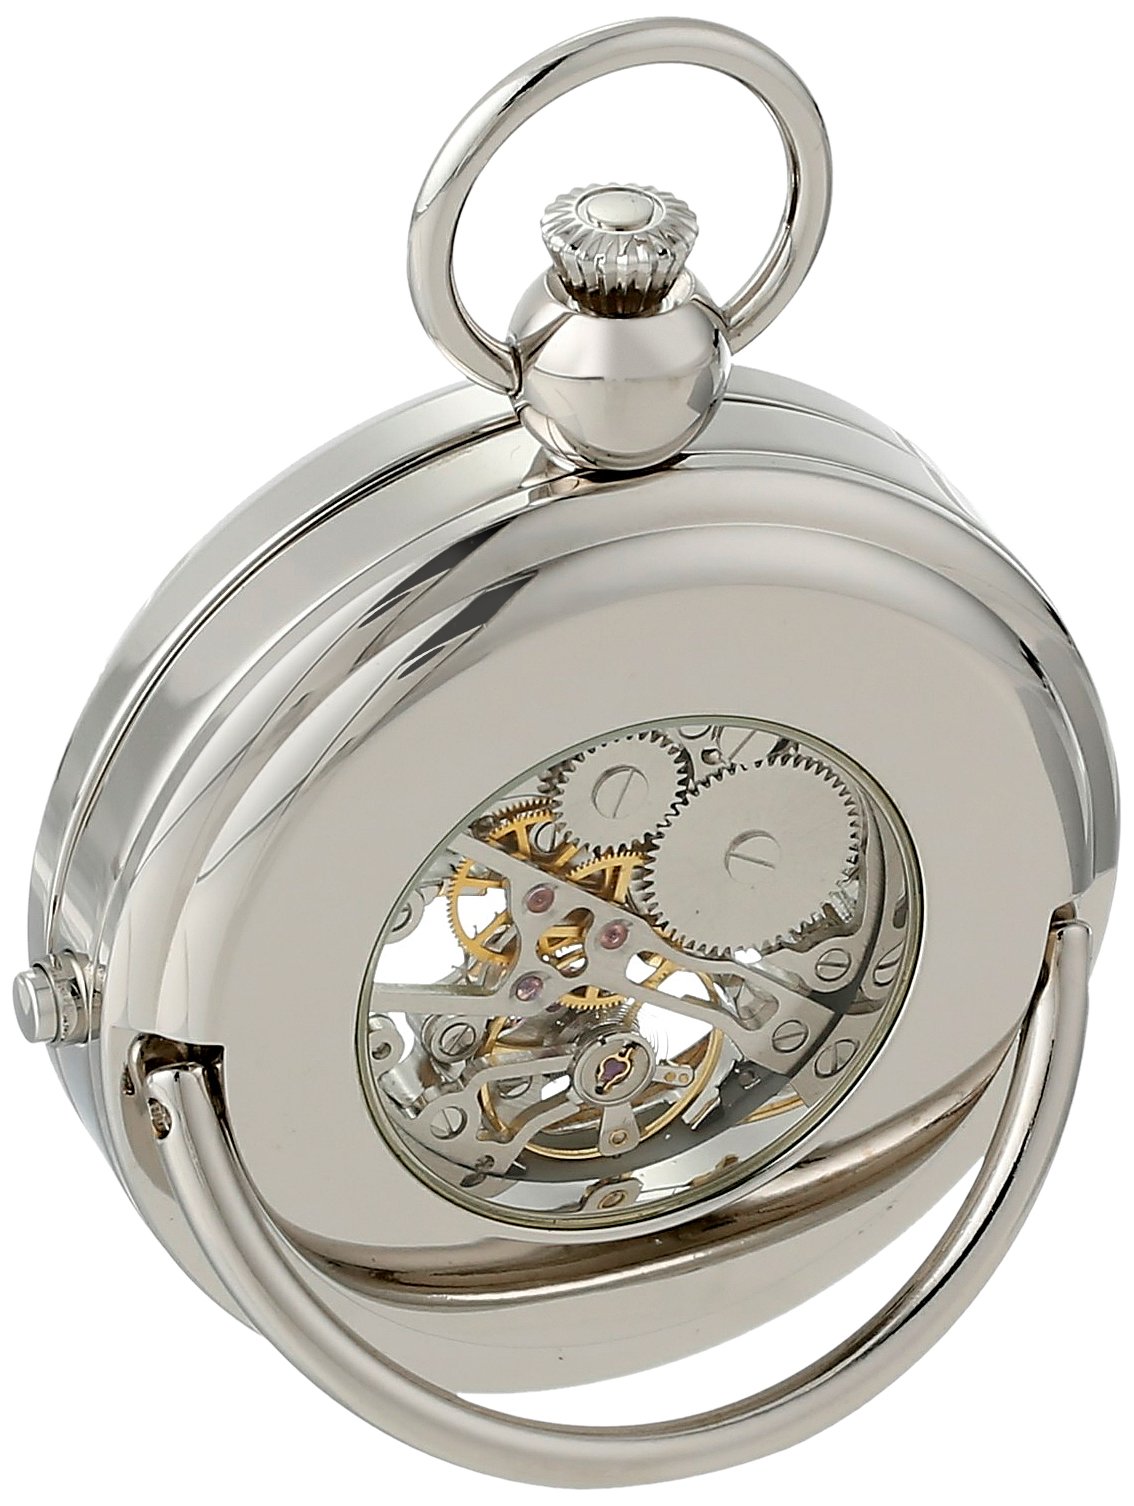 Charles Hubert 3849 Mechanical Picture Frame Pocket Watch